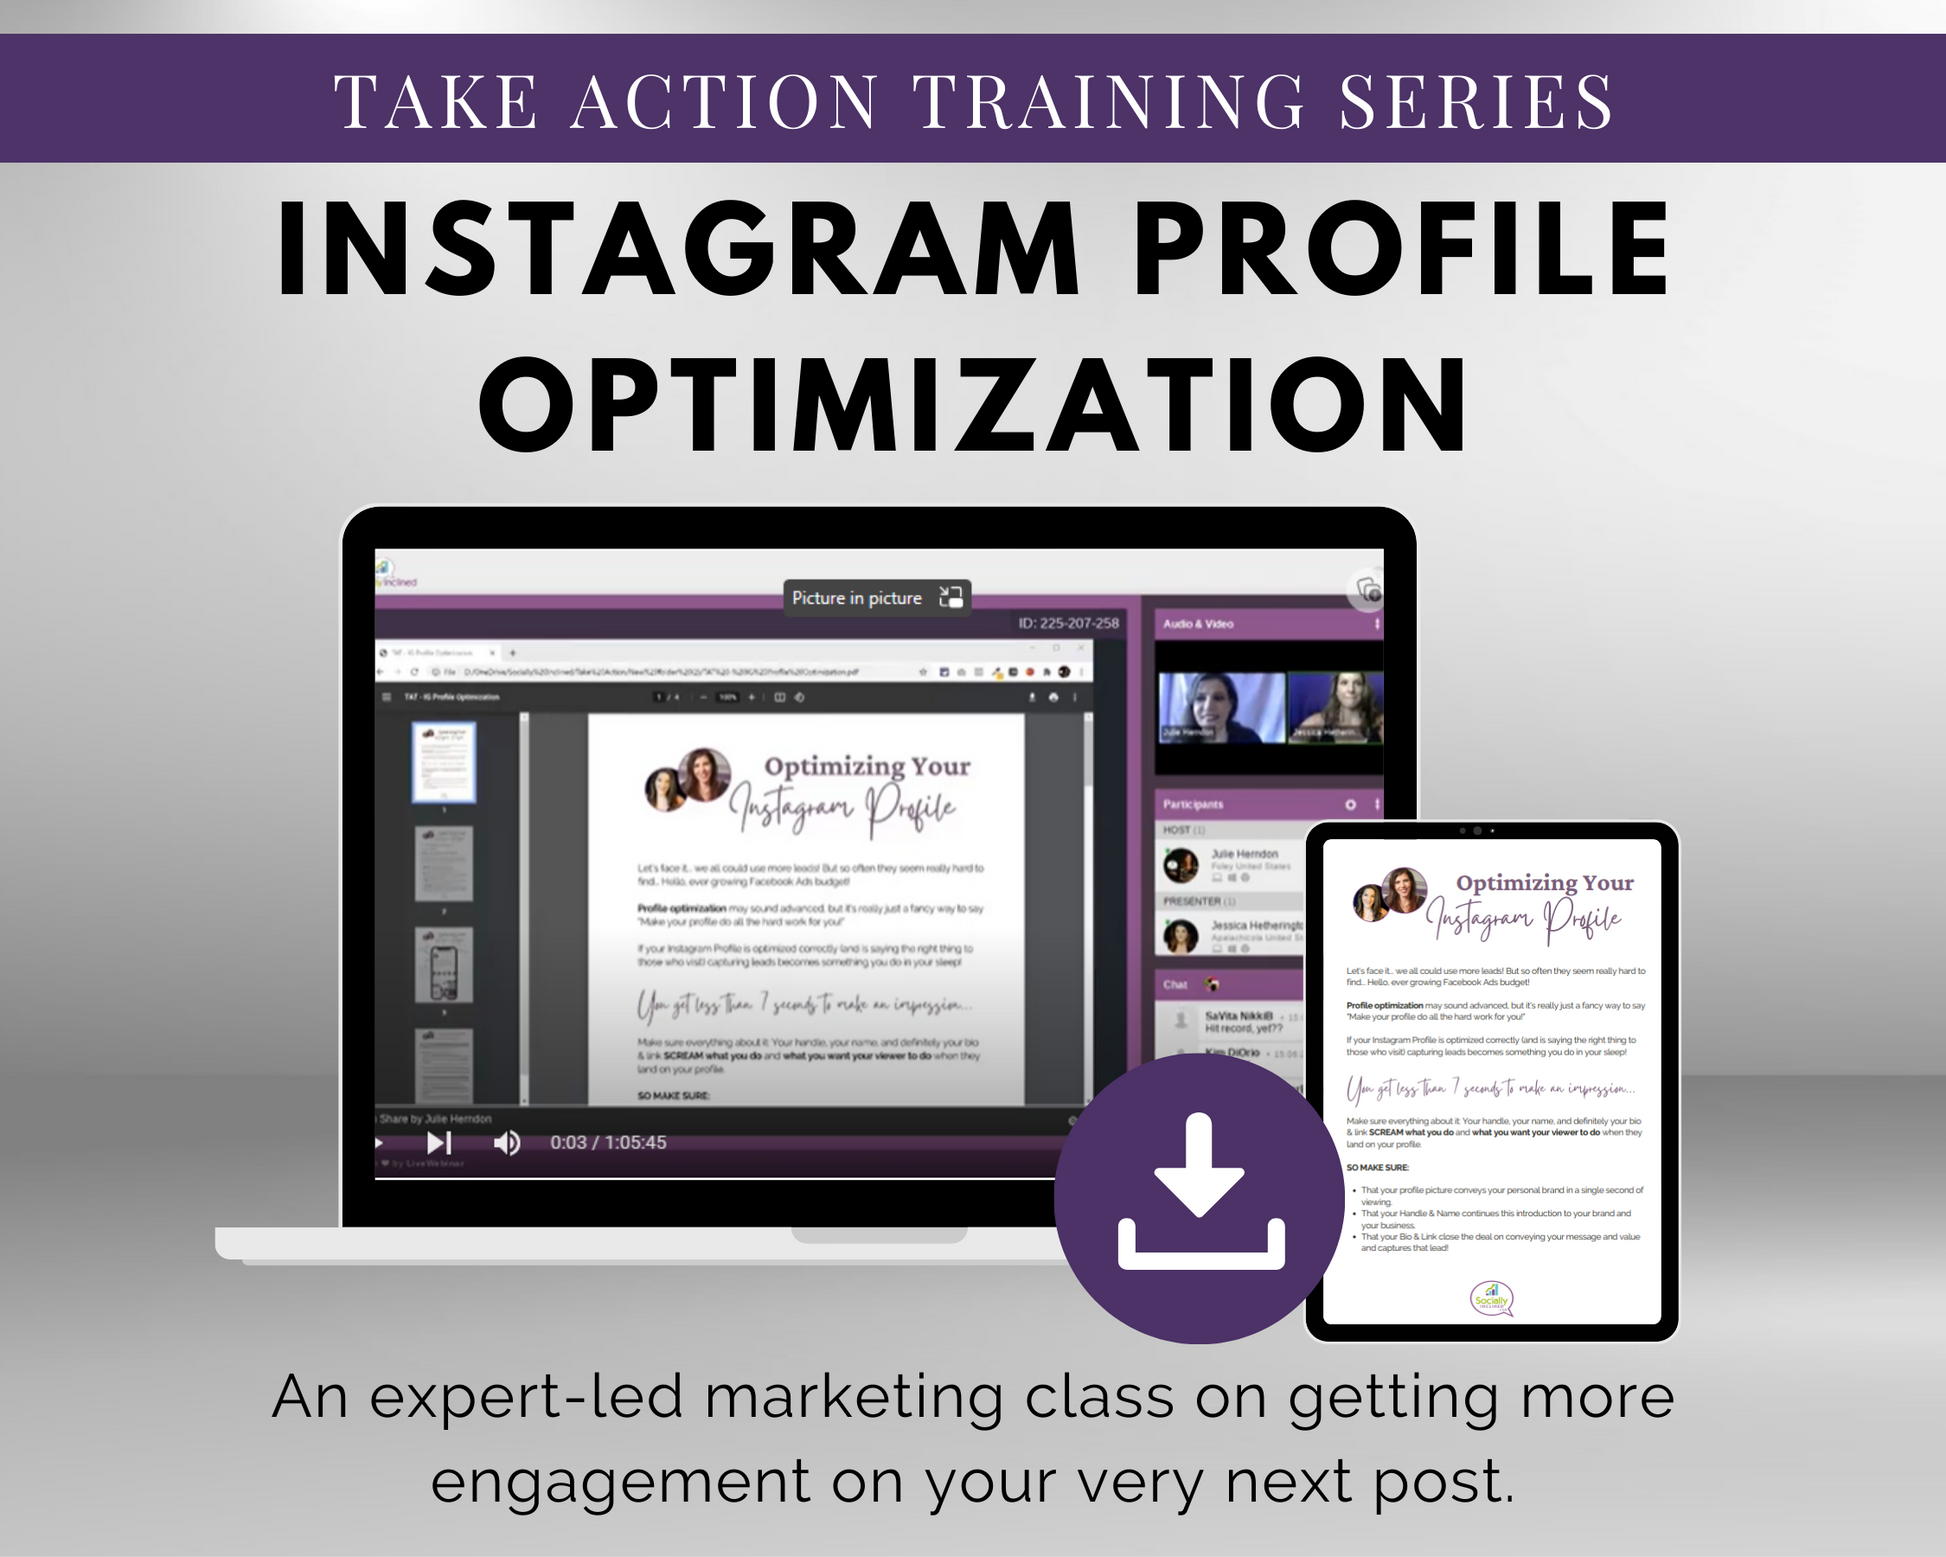 Description: Take action training series on TAT - Instagram Profile Optimization Masterclass, provided by Get Socially Inclined, offering expert guidance and strategies to maximize visibility and engagement.